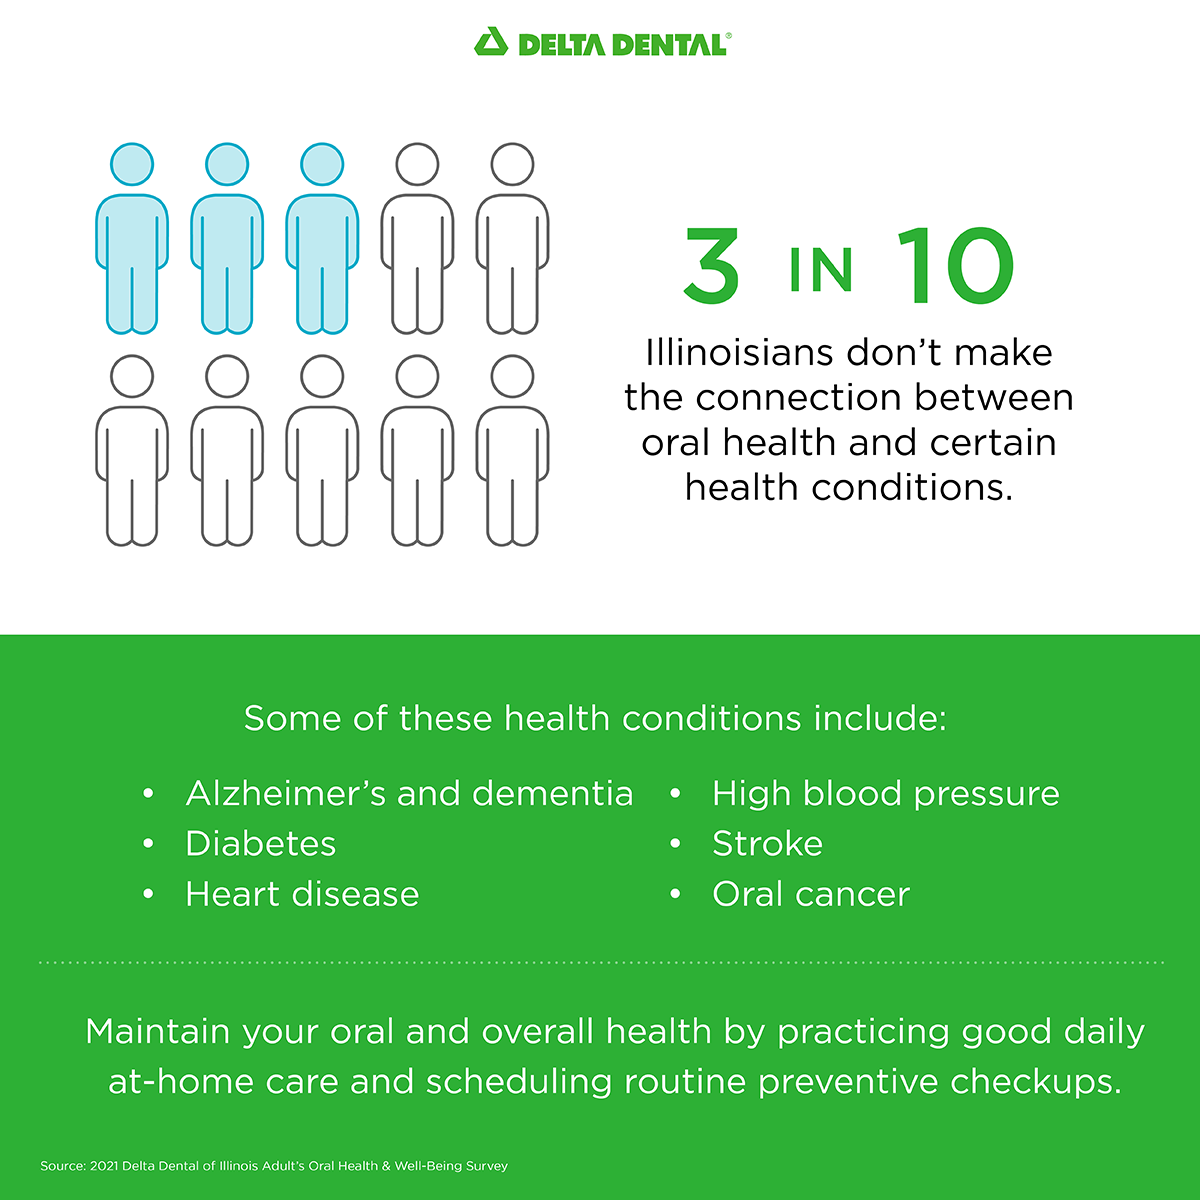 infographic showing 3 in 10 Illinoisans not knowing a connection to oral and overall health